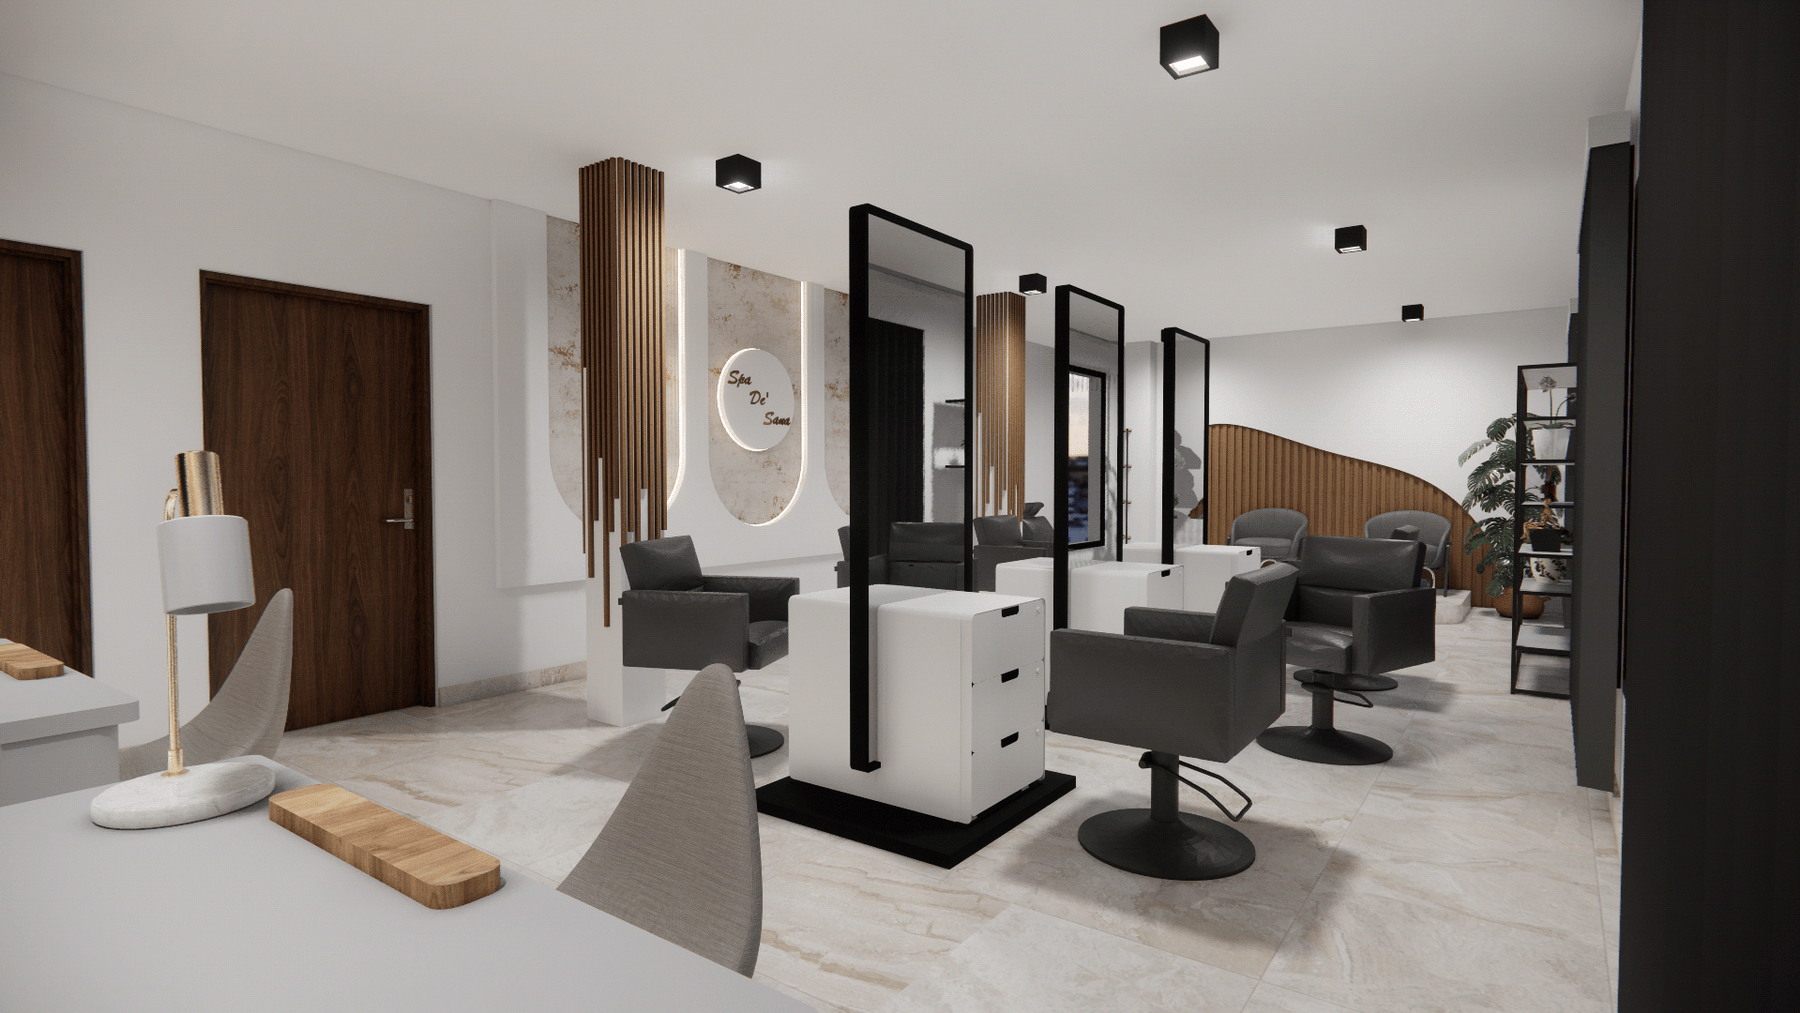 Embracing Nature: Salon and Spa Interior Design with Organic Elements